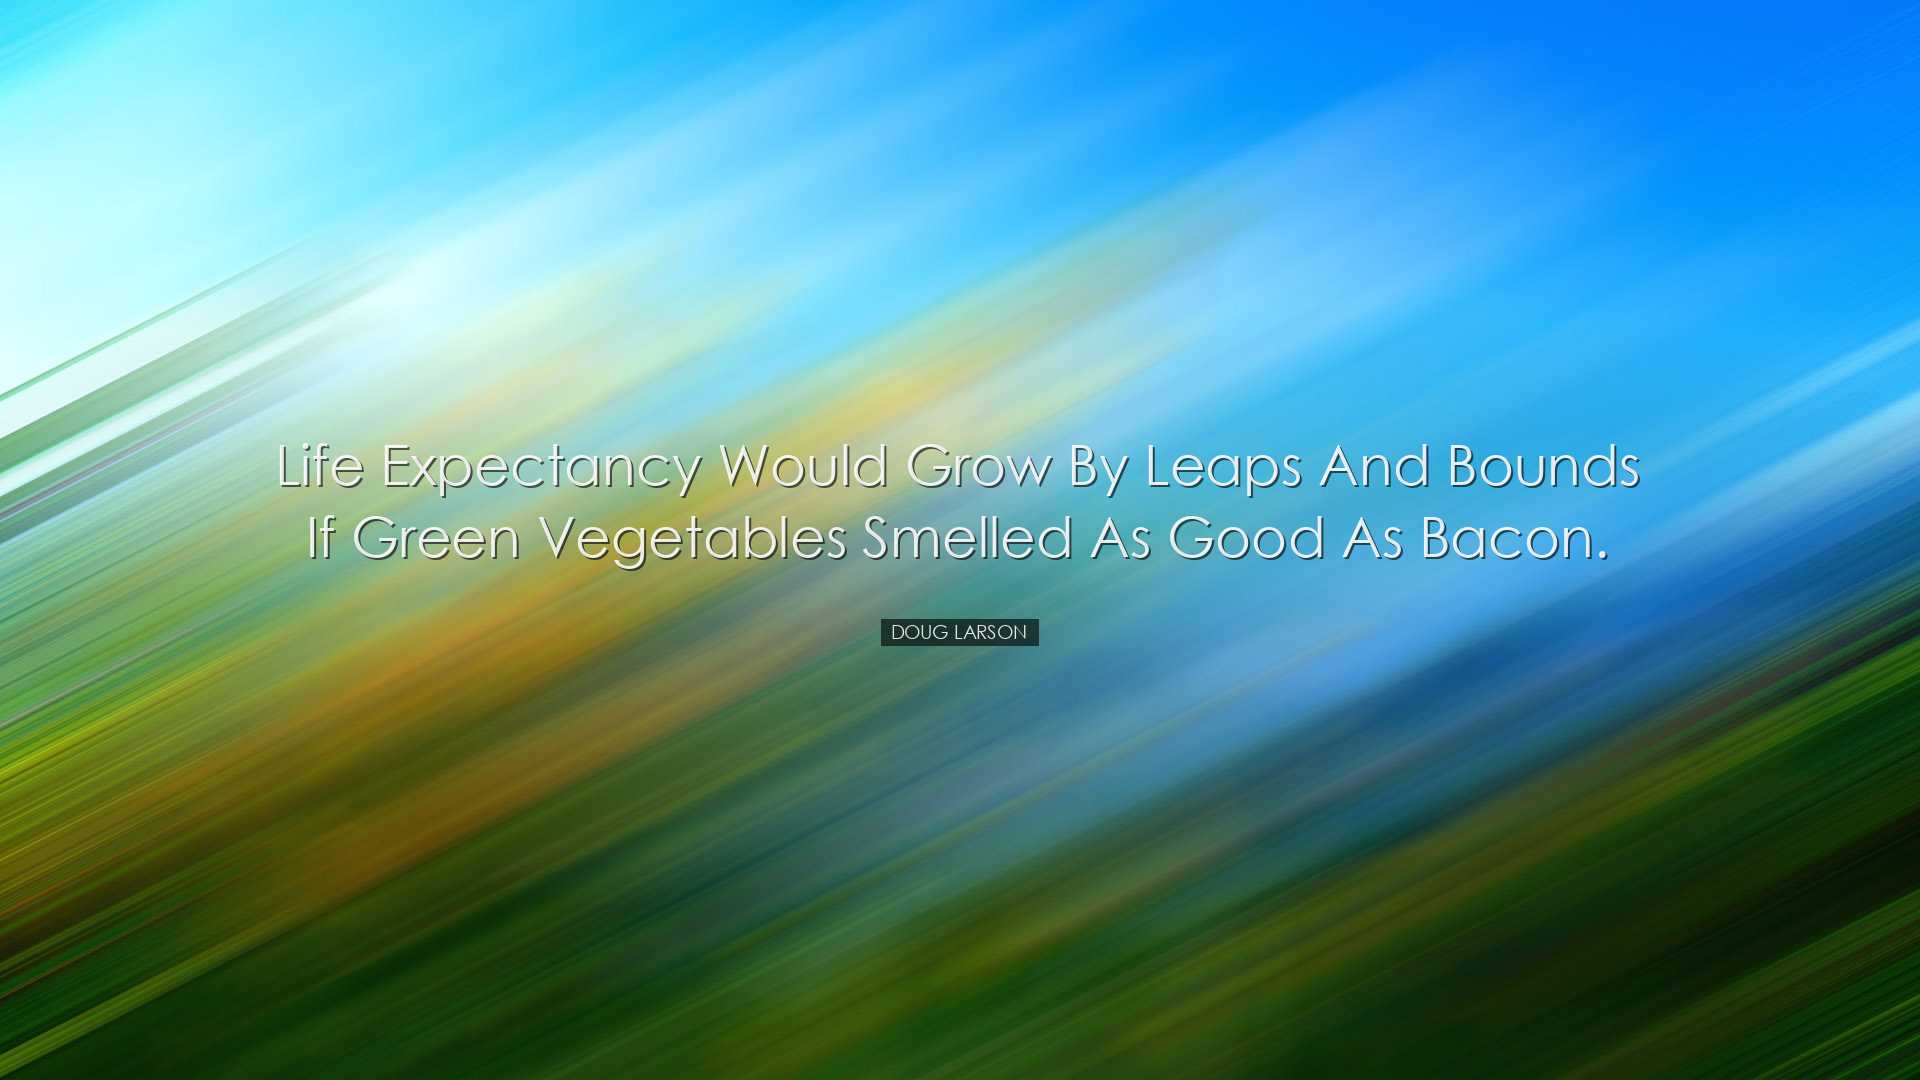 Life expectancy would grow by leaps and bounds if green vegetables